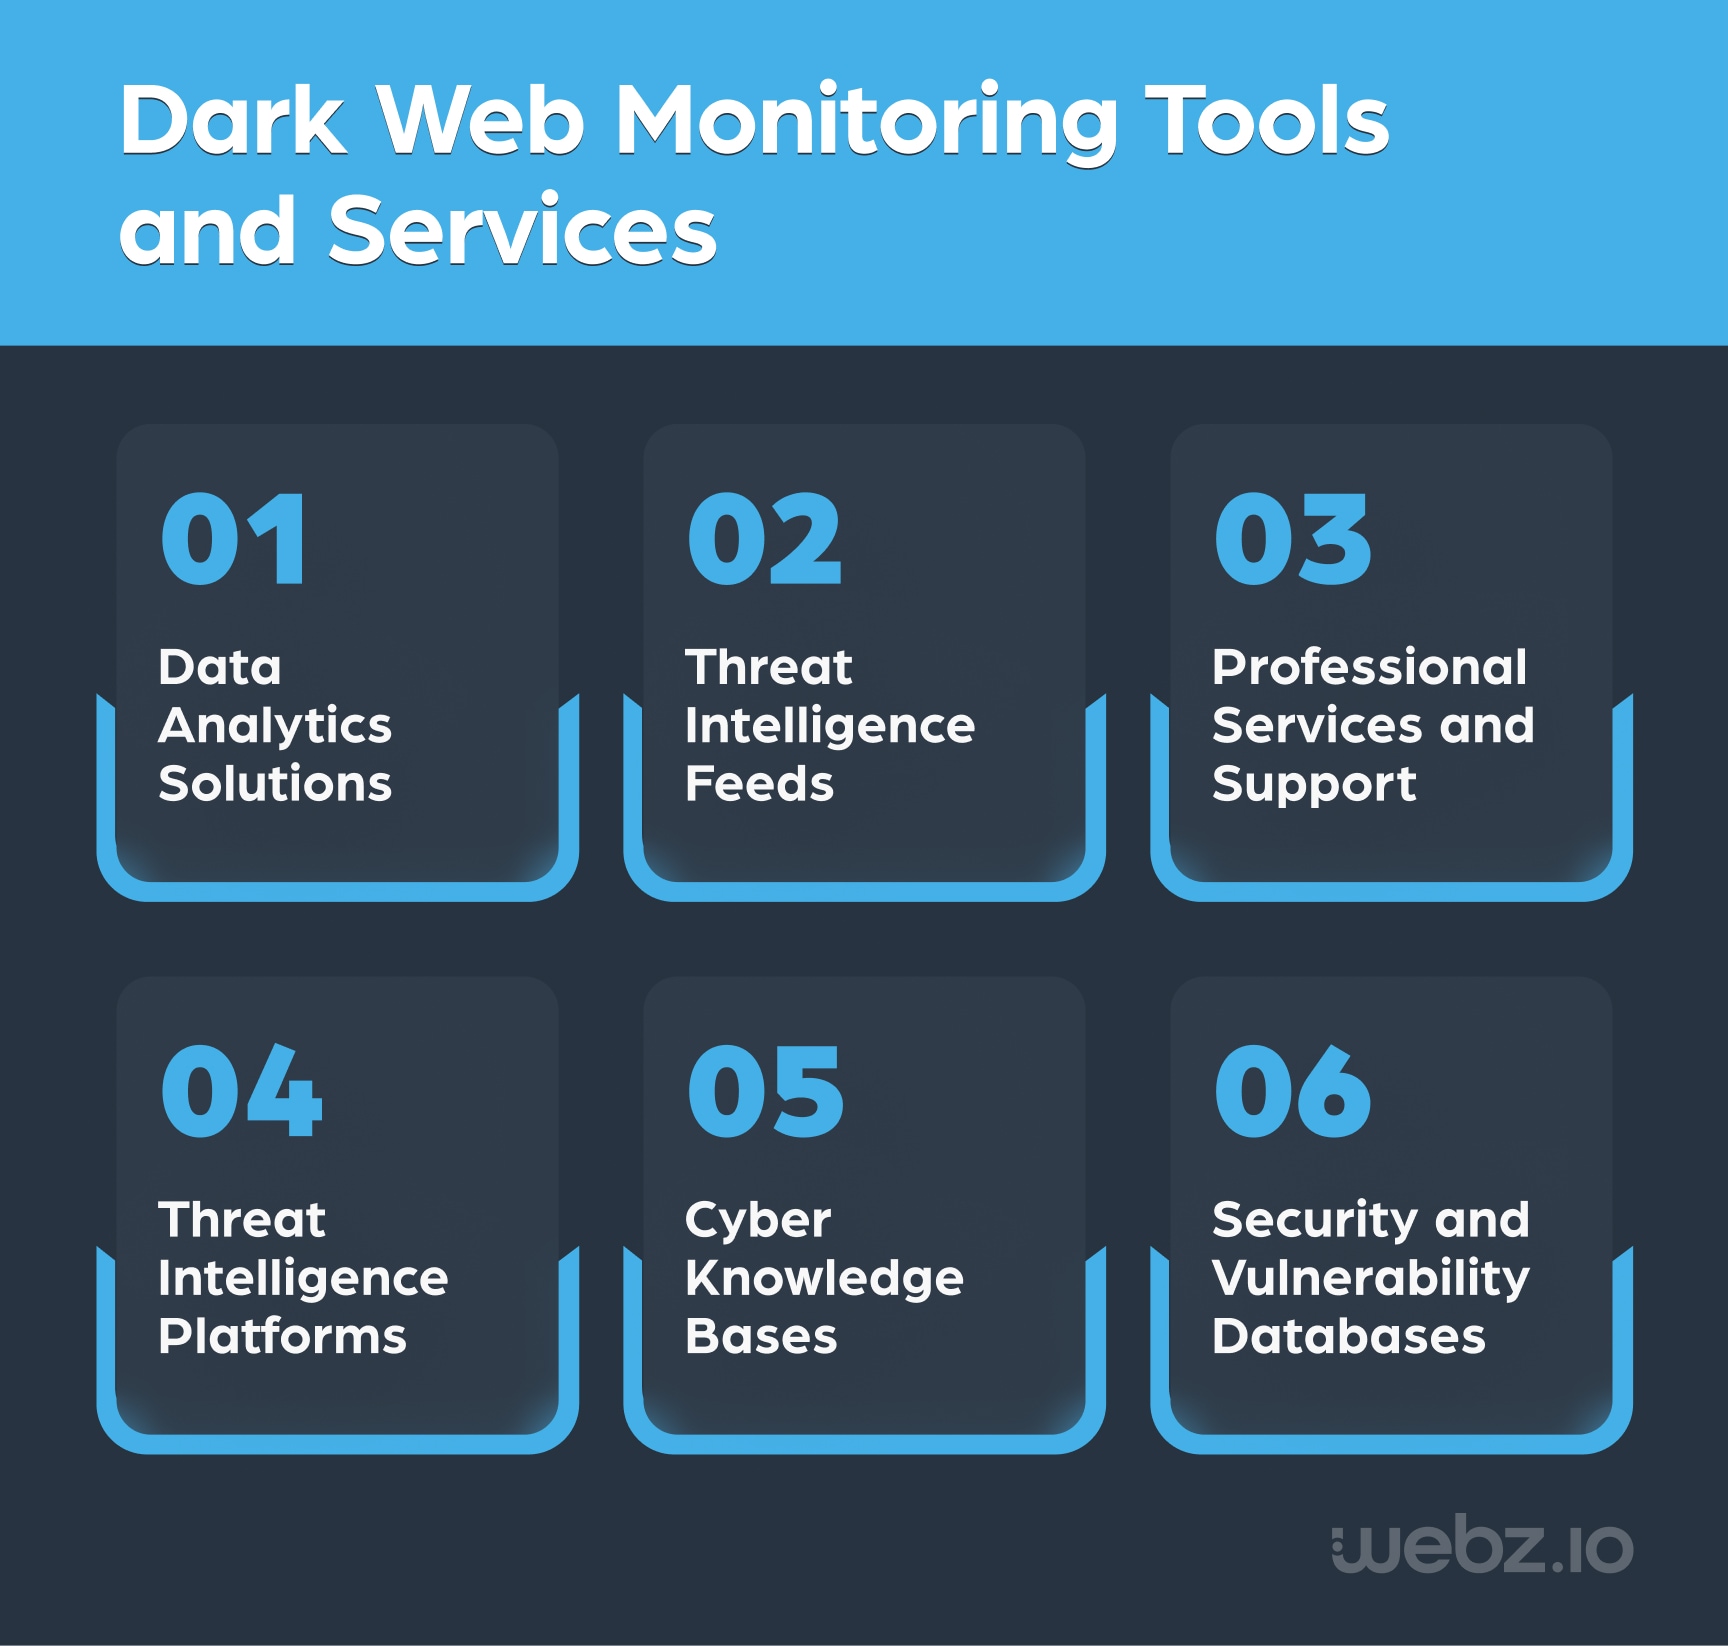 Tools and services for dark web monitoring